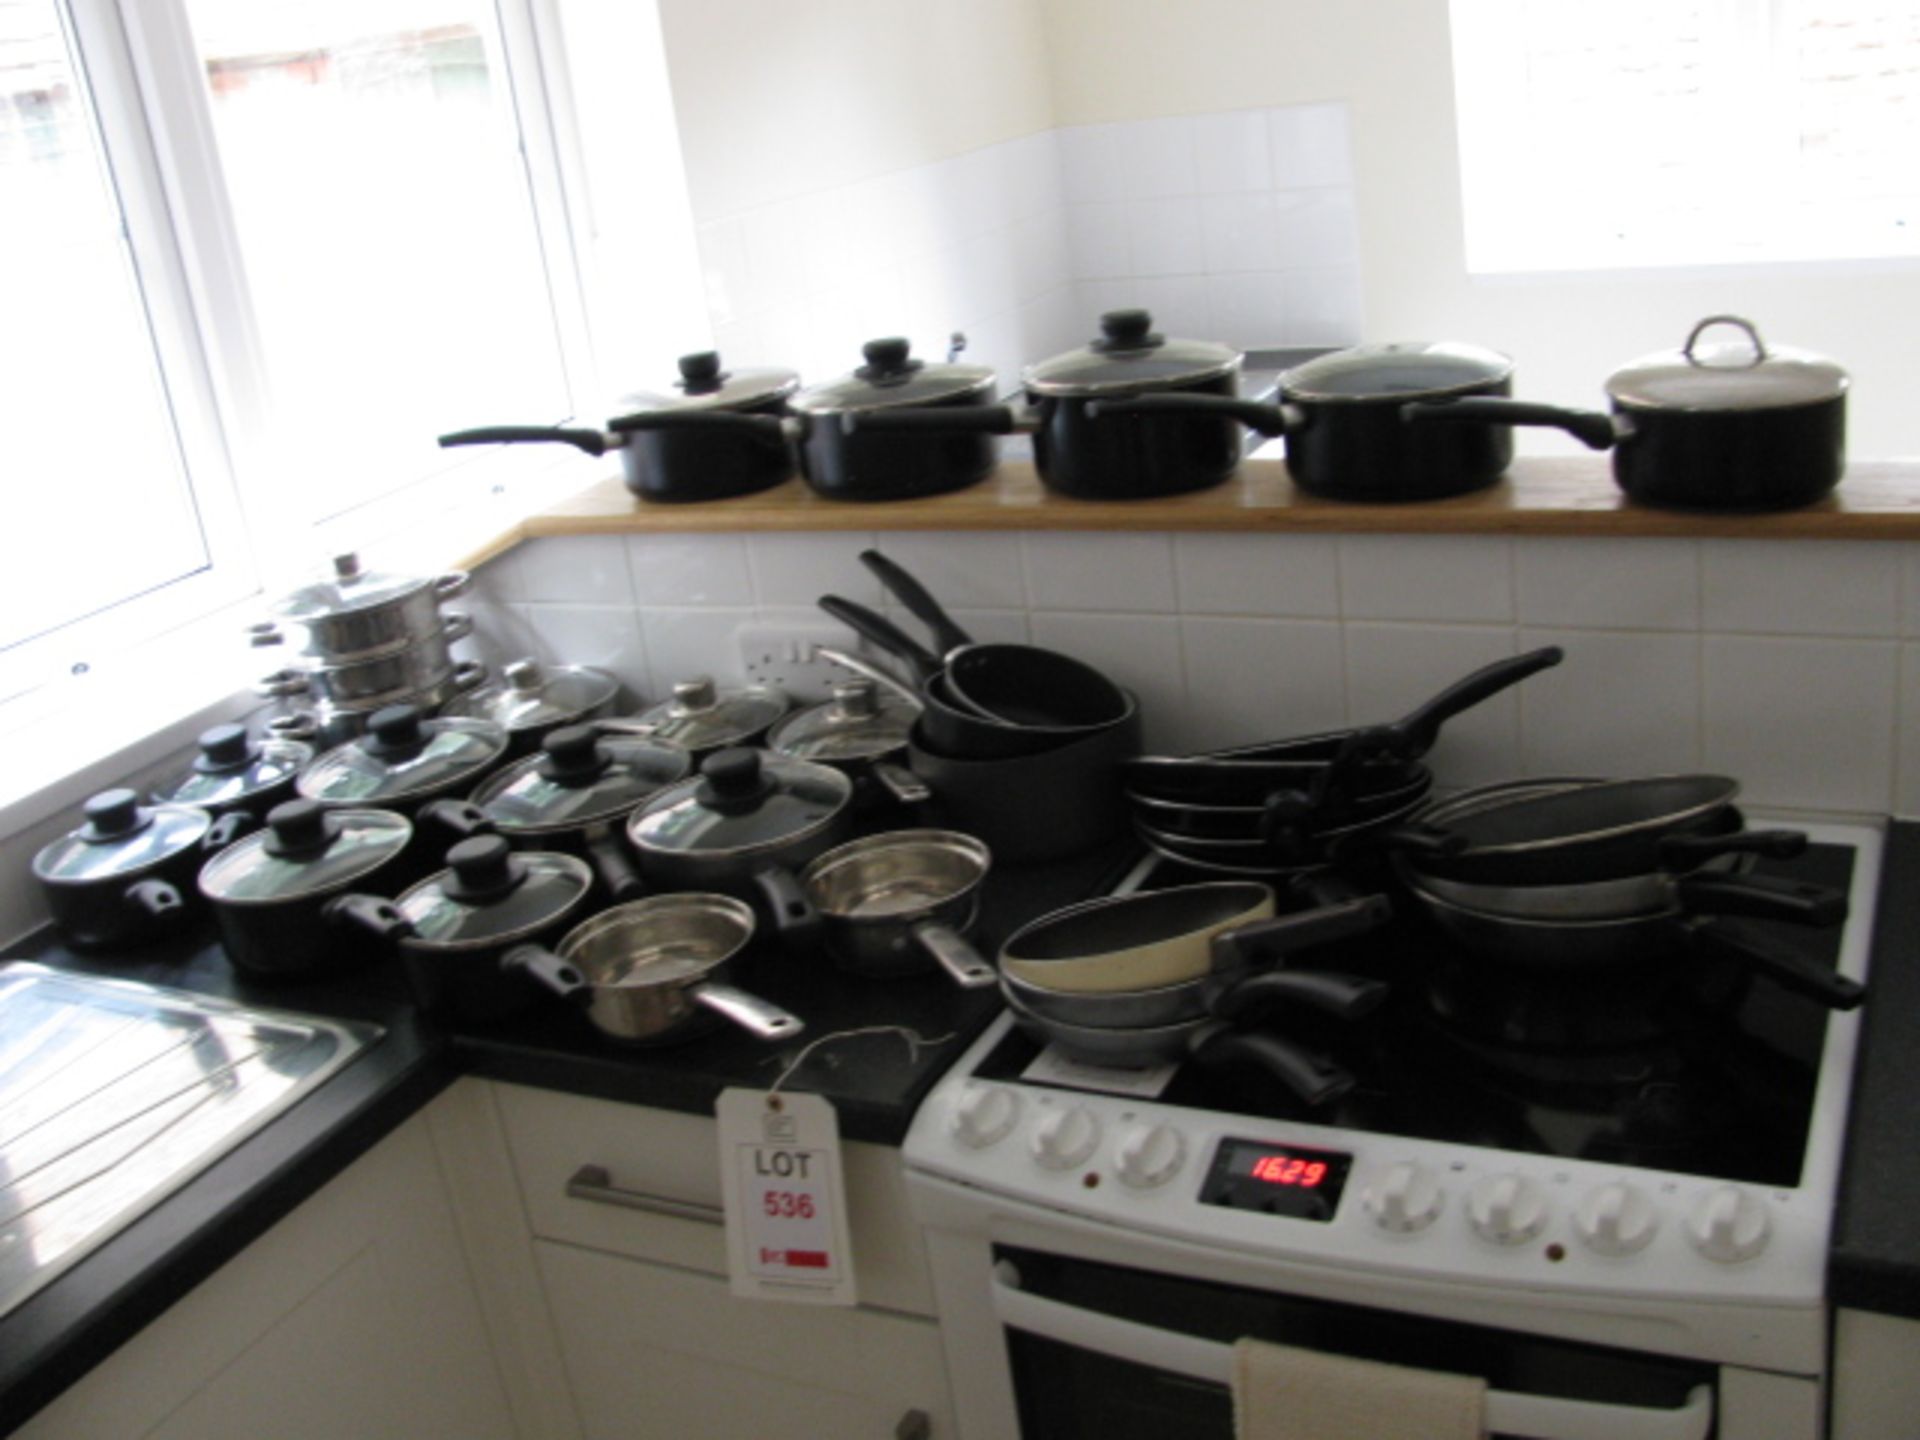 Quantity of various pots and pans